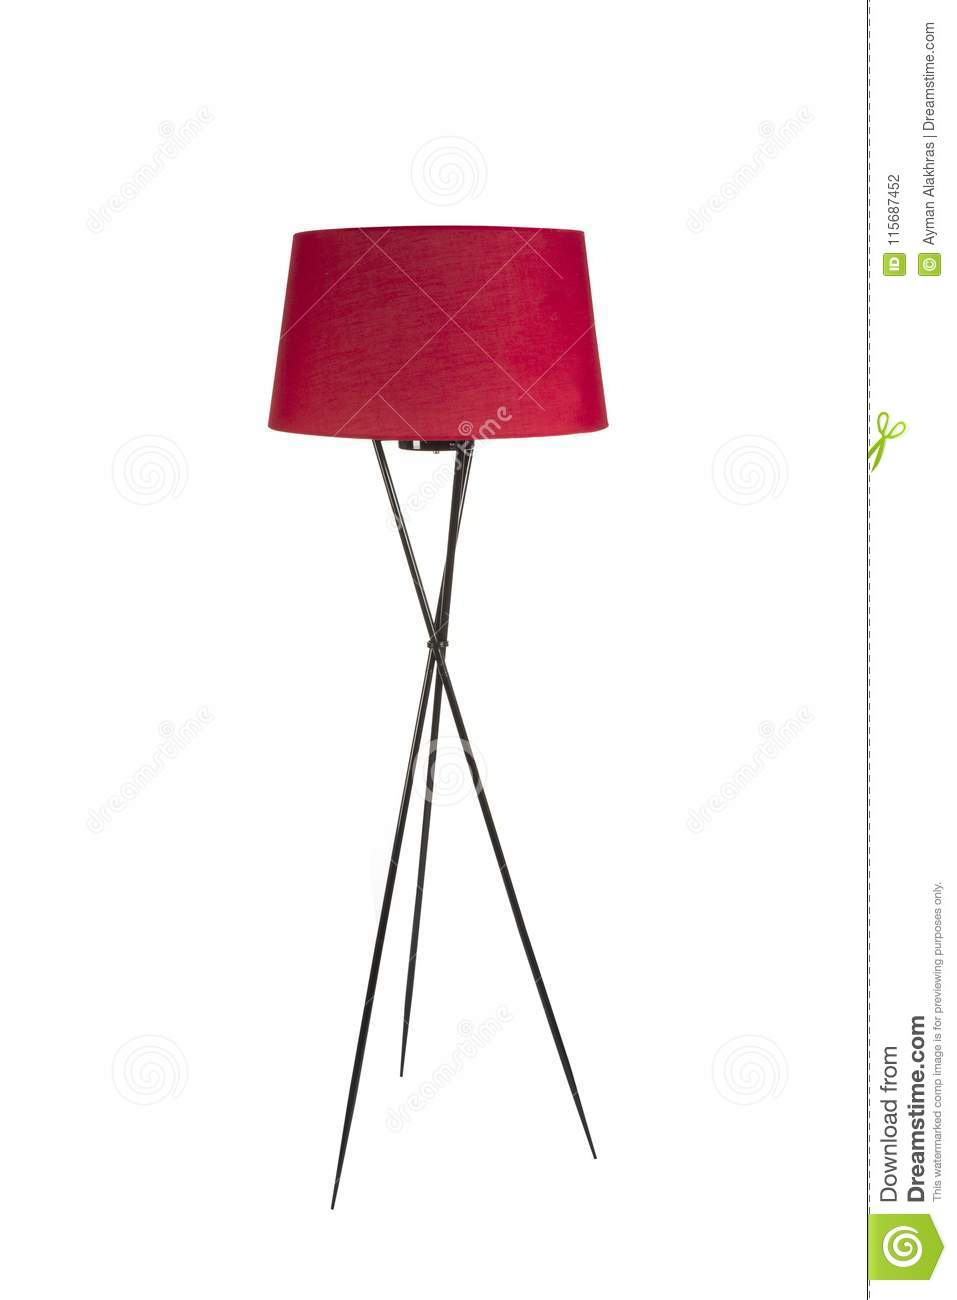 Tripod Red Floor Lamp On White Background Stock Photo pertaining to dimensions 957 X 1300